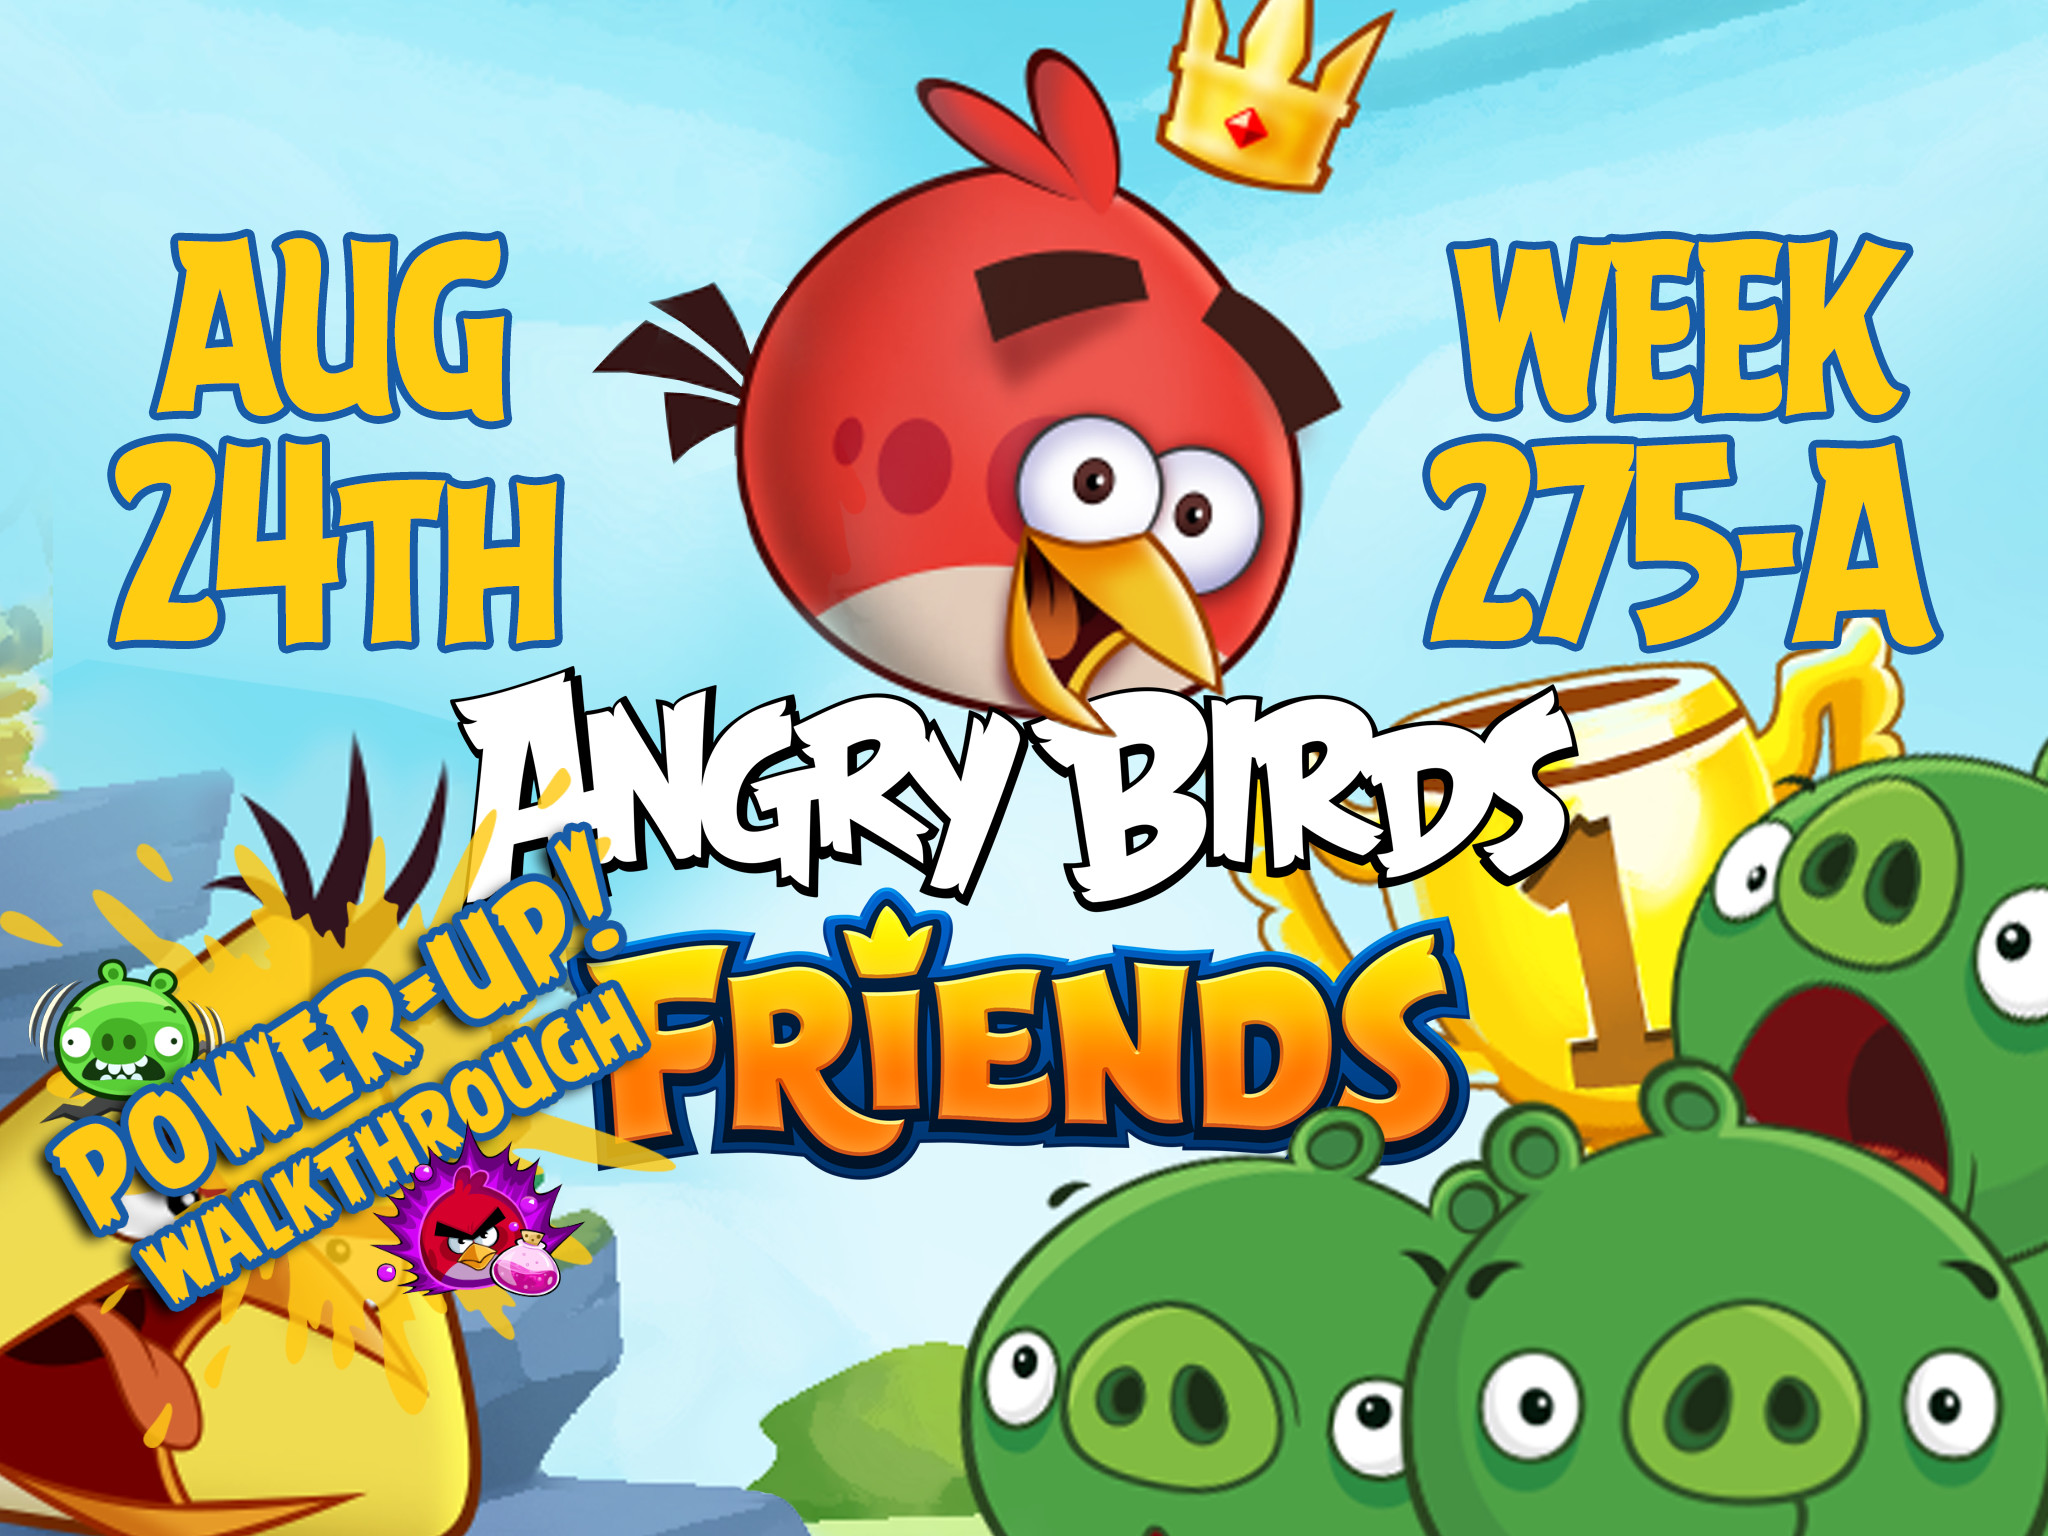 Angry Birds Friends Tournament Week 275-A Feature Image PU